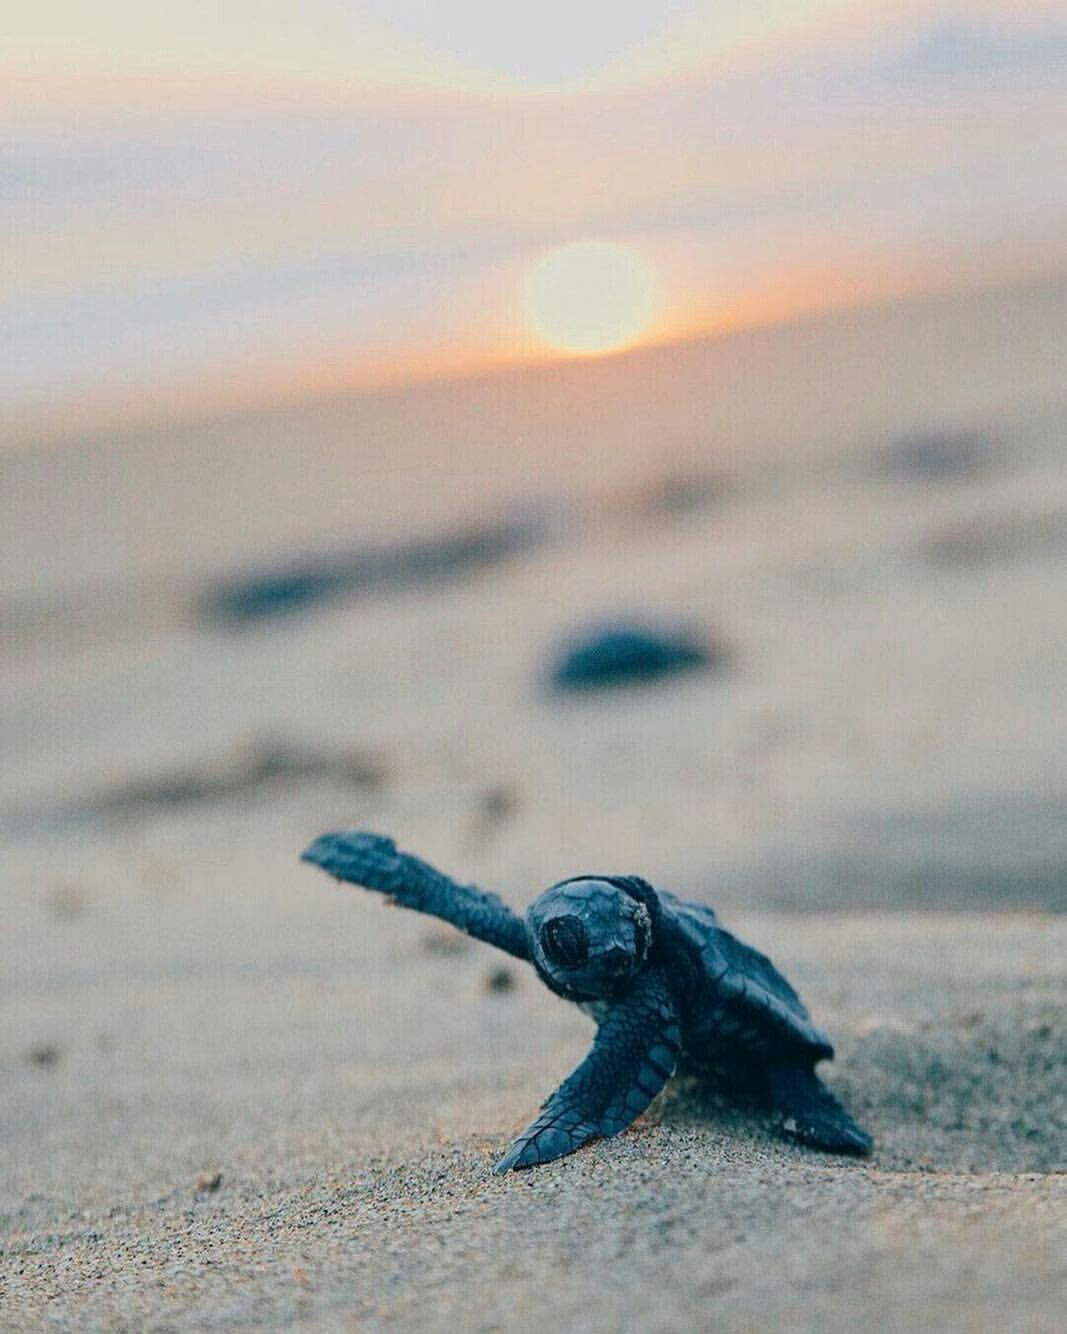 A baby turtle on the beach - Turtle, sea turtle